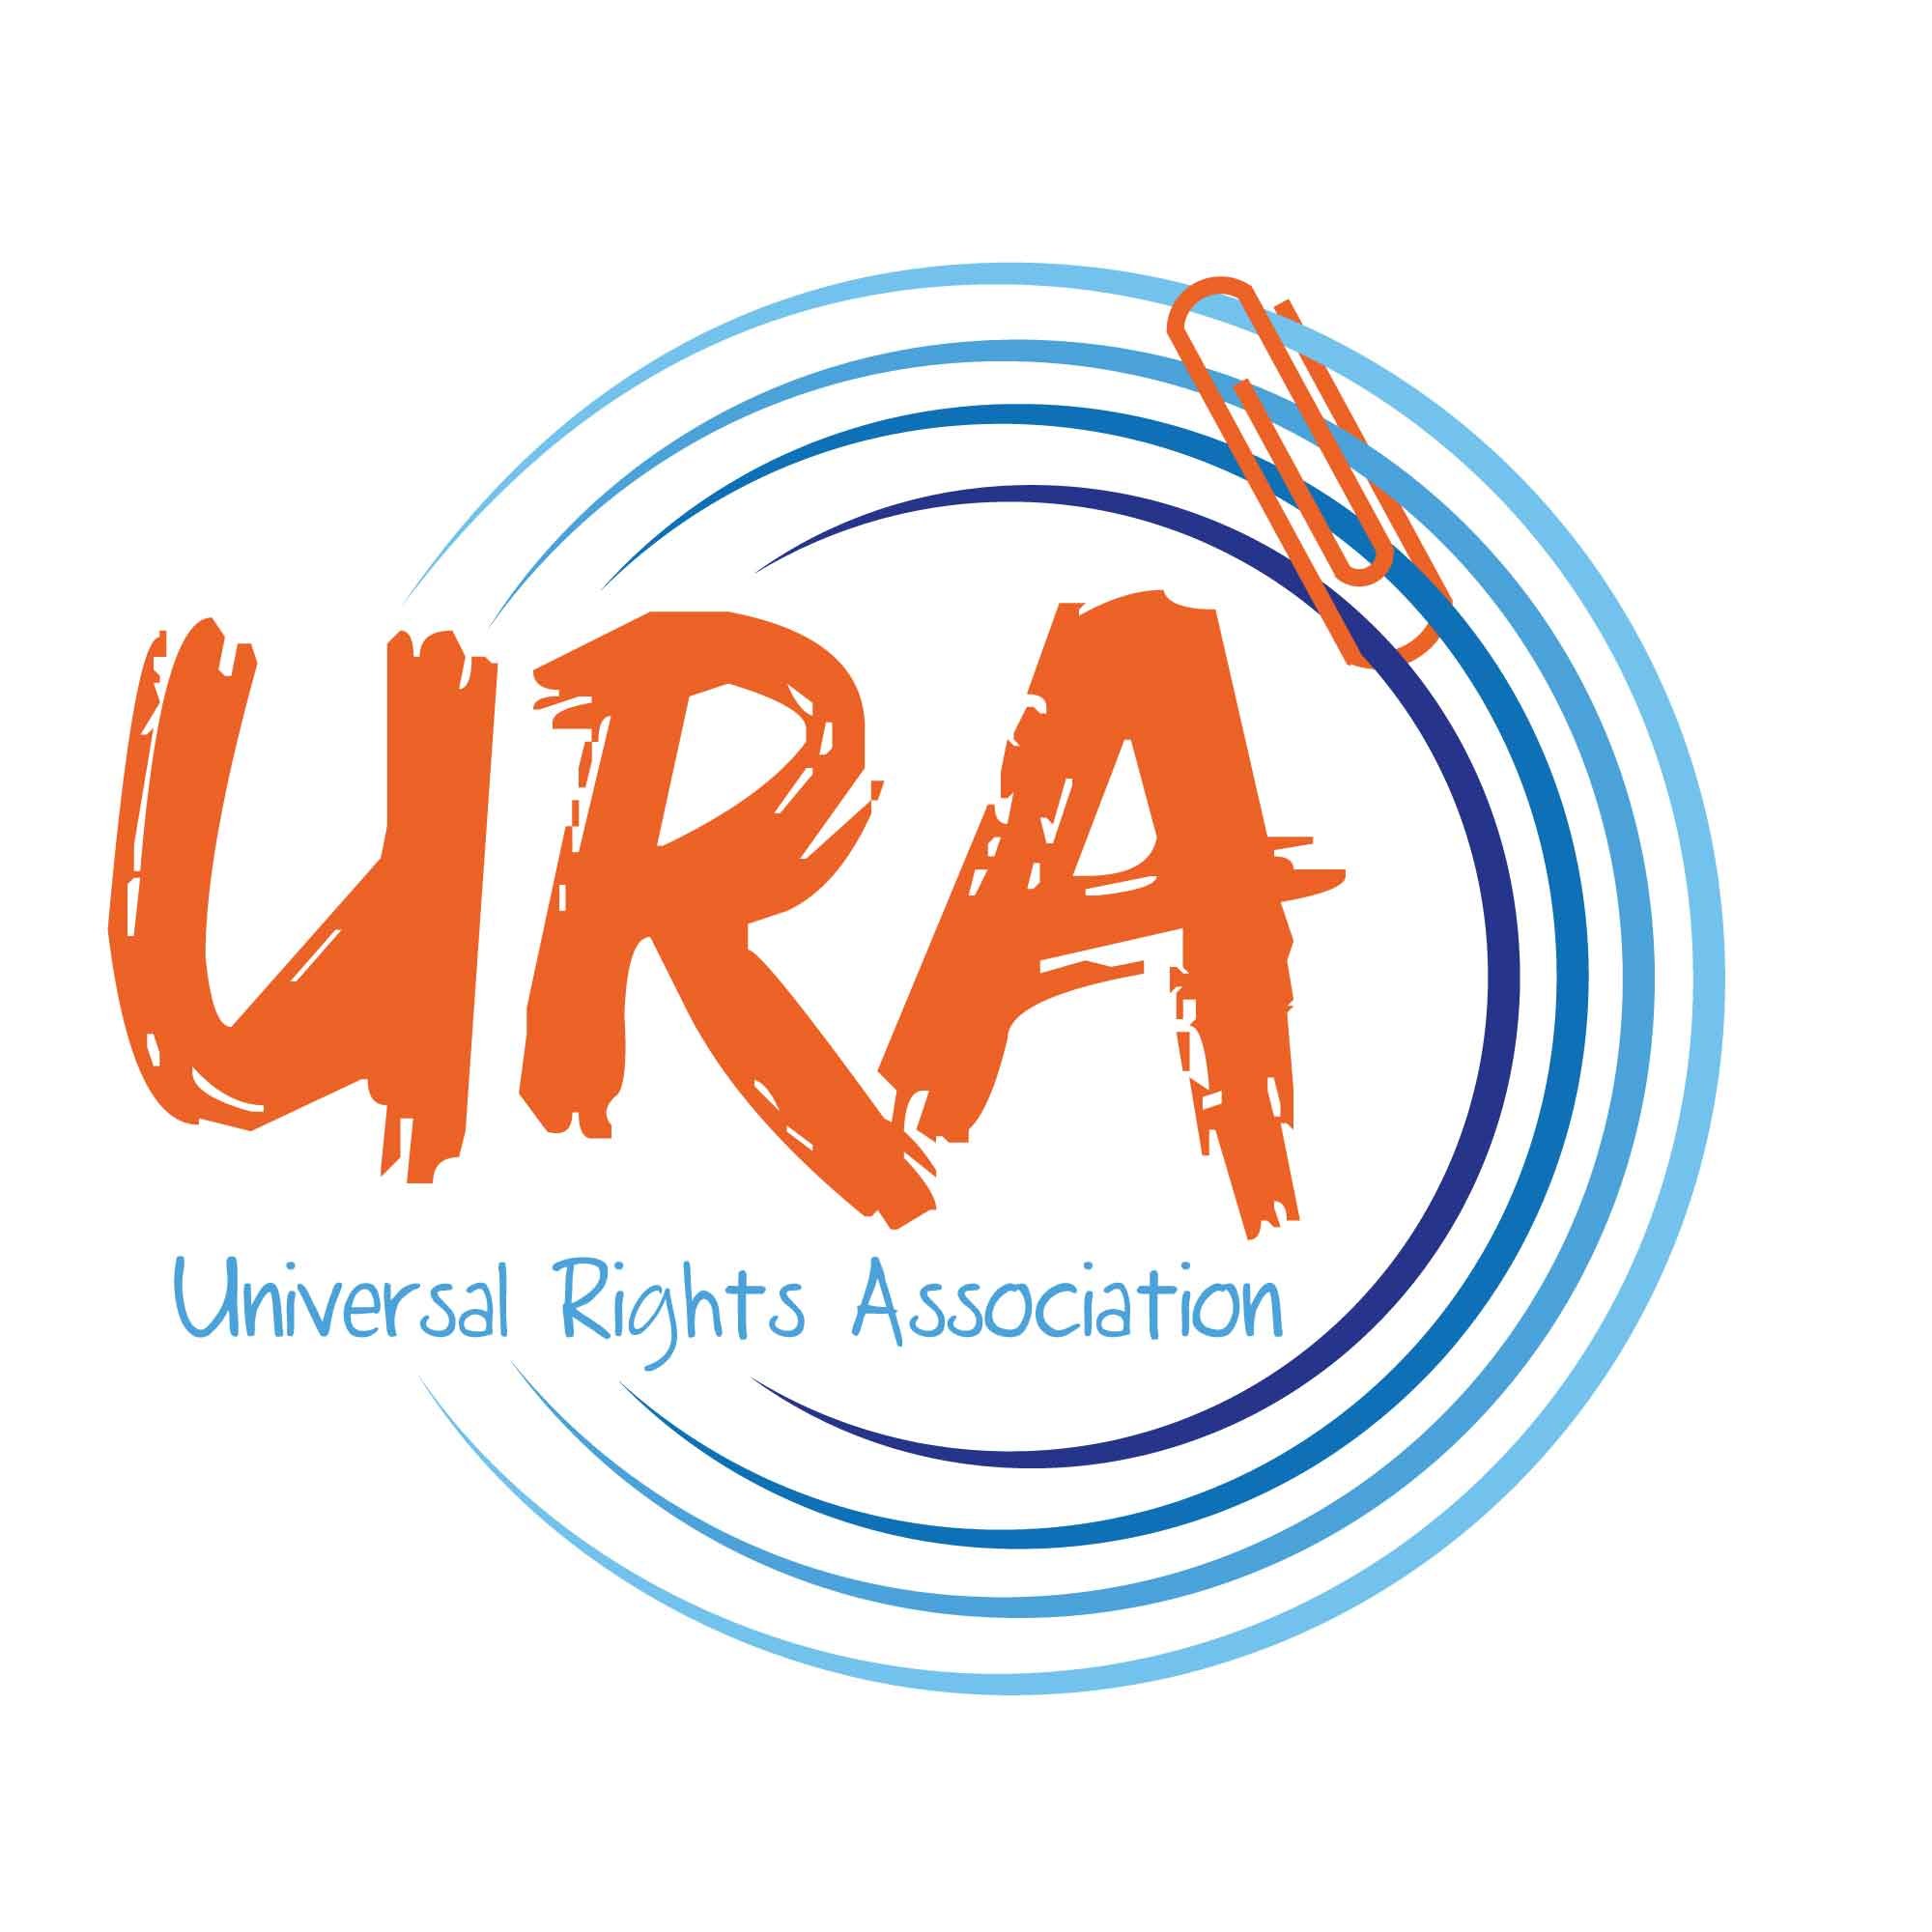 Universal Right Association (URA) is a civil society organization dedicated to promote and protect human rights, the rule of law, equality, democracy and peace.